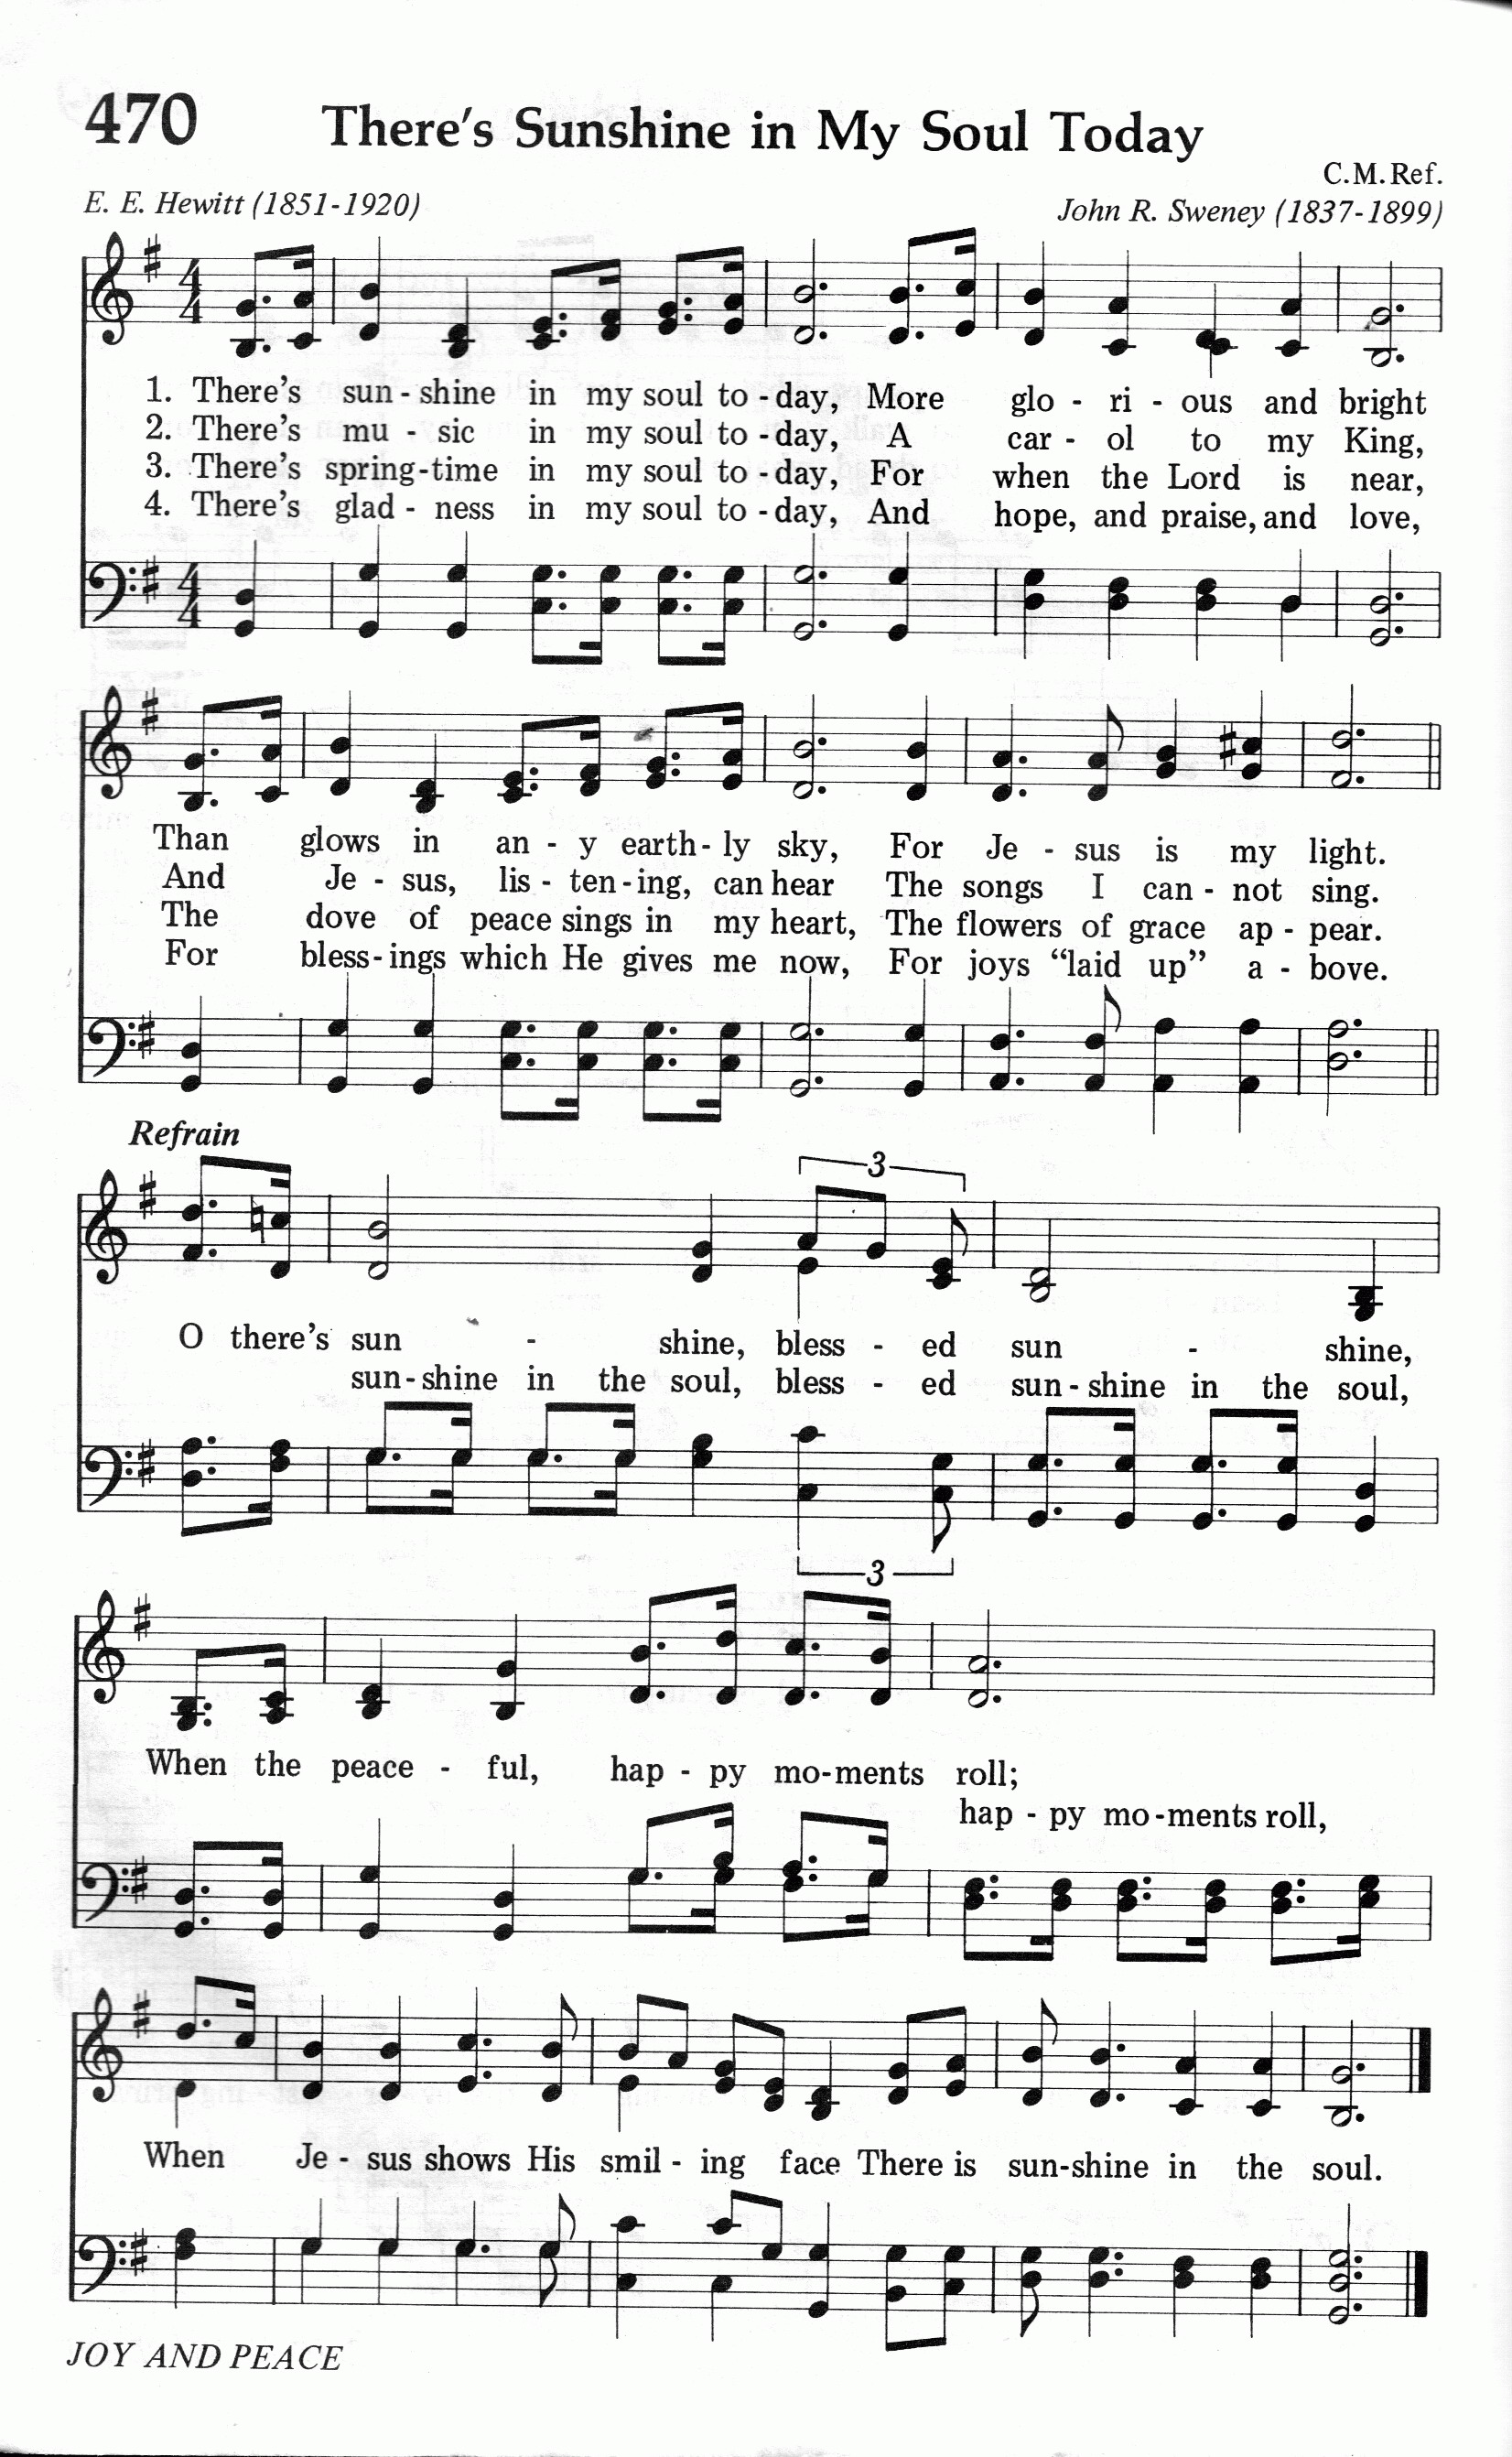 471.Grant Us Your Peace-695HYMN